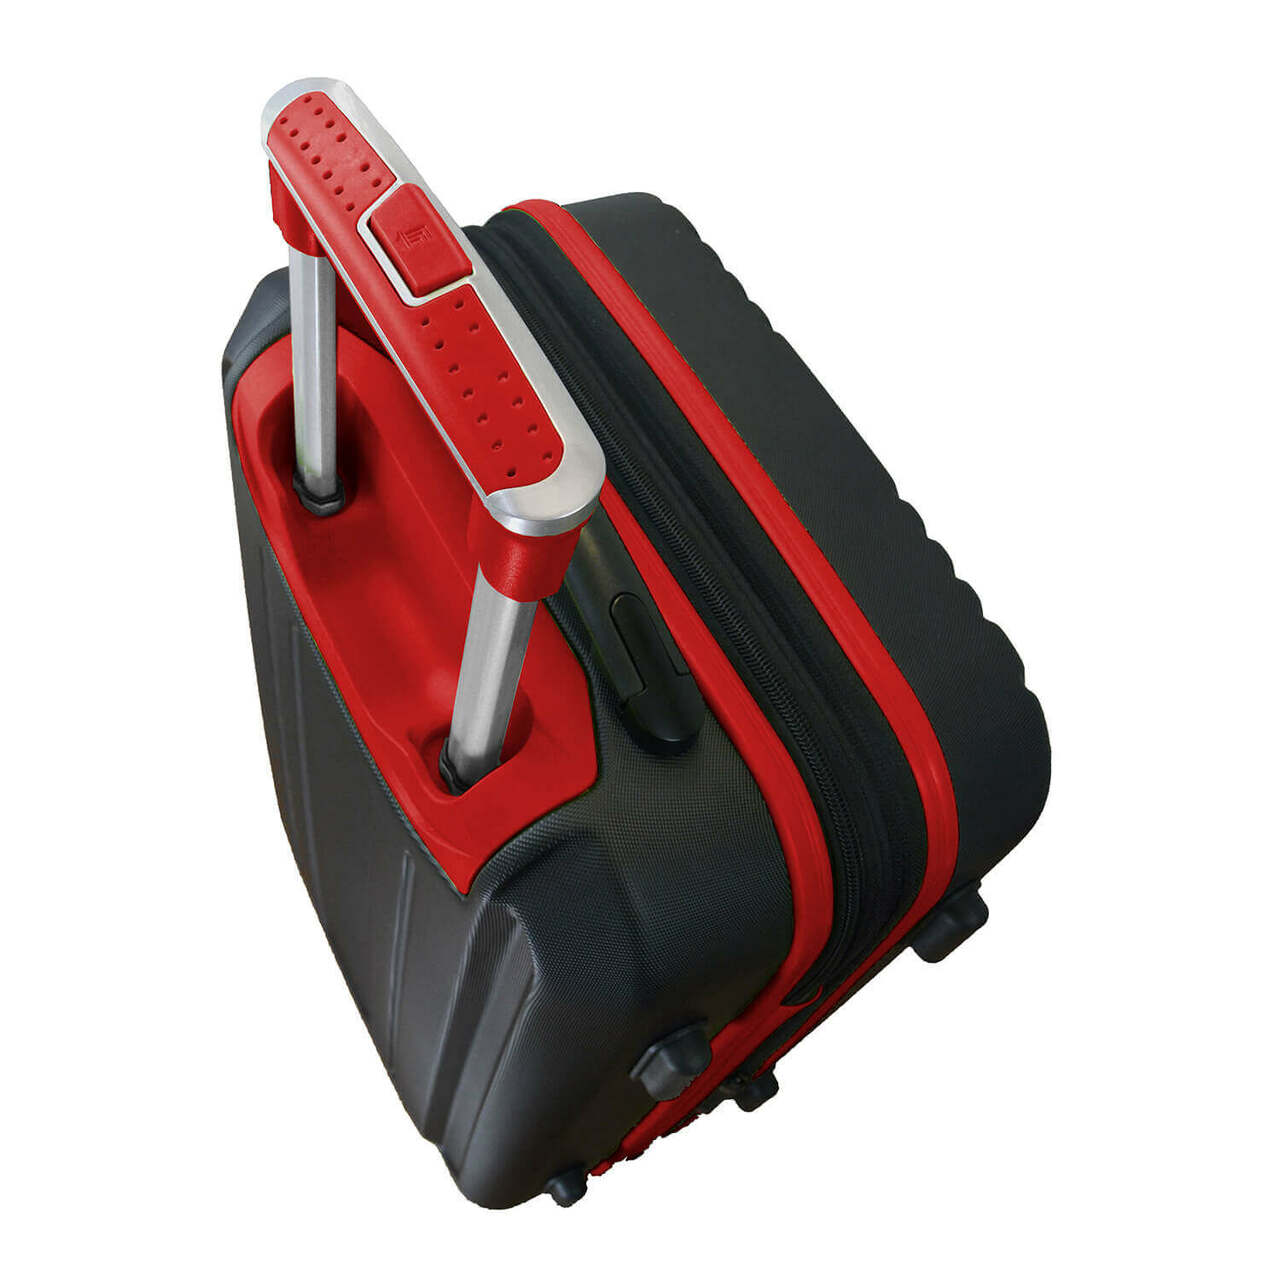 Wisconsin Carry On Spinner Luggage | Wisconsin Hardcase Two-Tone Luggage Carry-on Spinner in Red